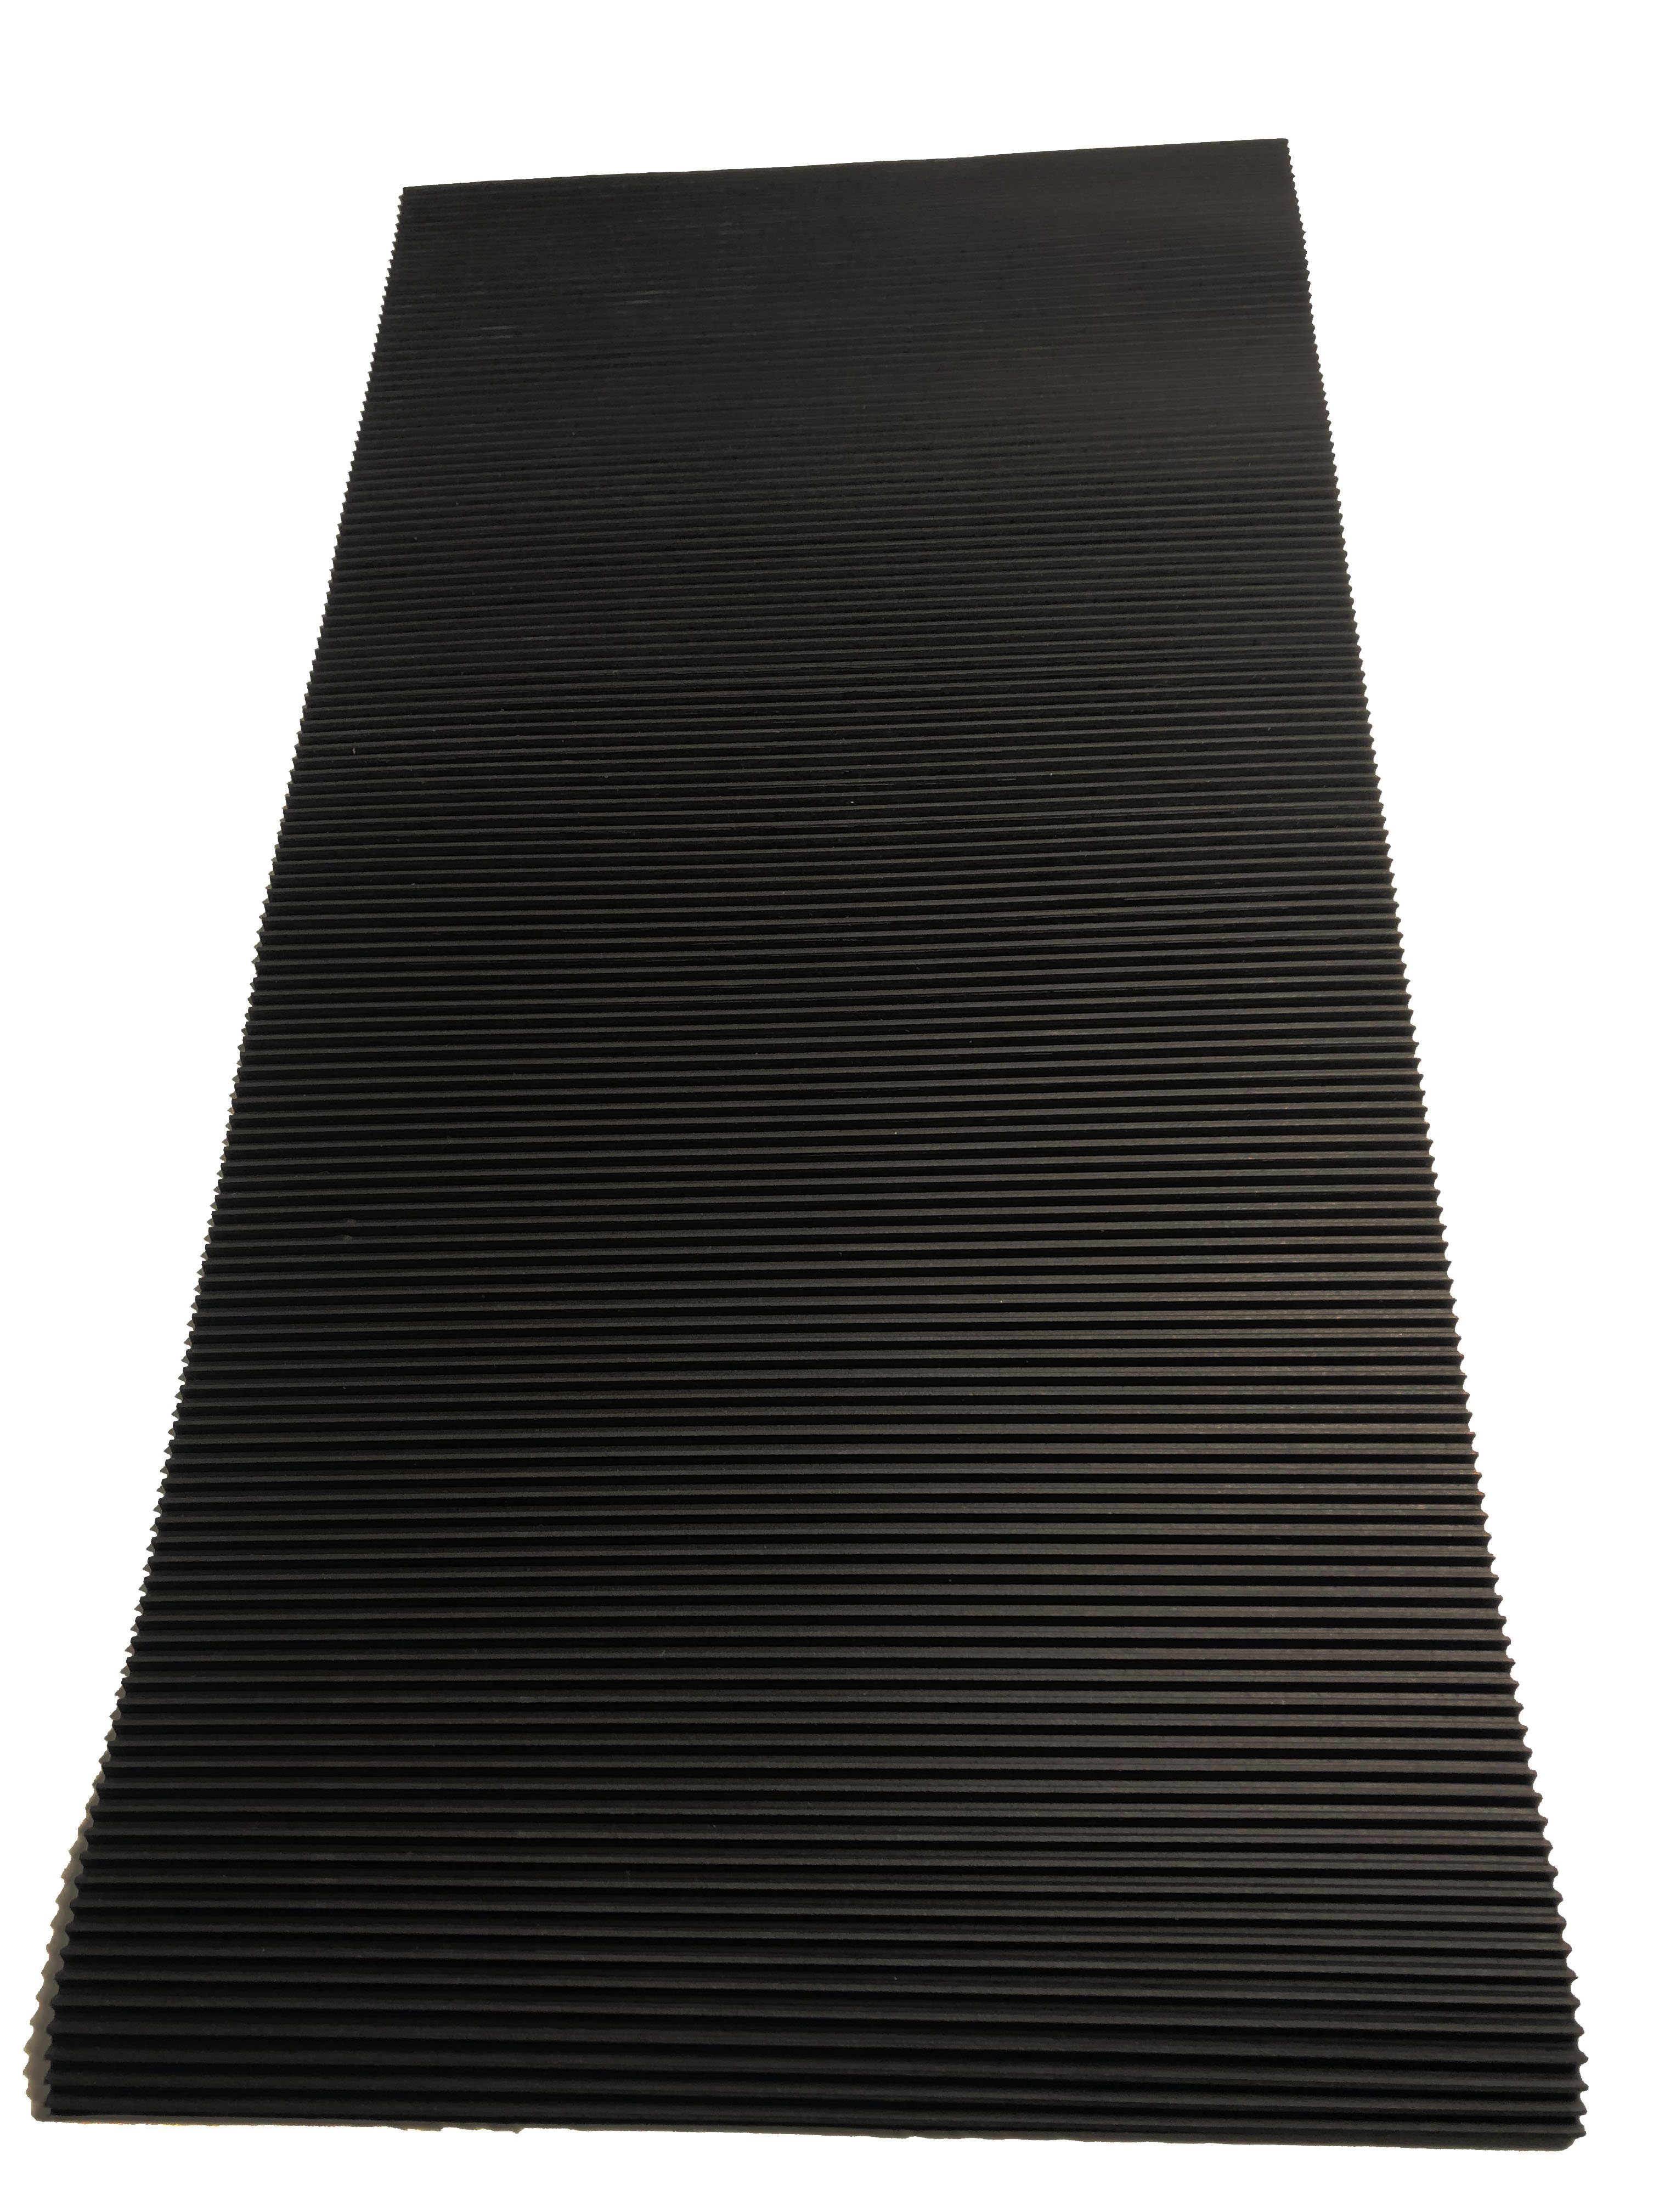 TUFF-STUFF DEEP V GROOVED Sluice Mat 12 x 24 Inches Gold Prospecting,Accessories Jobe 